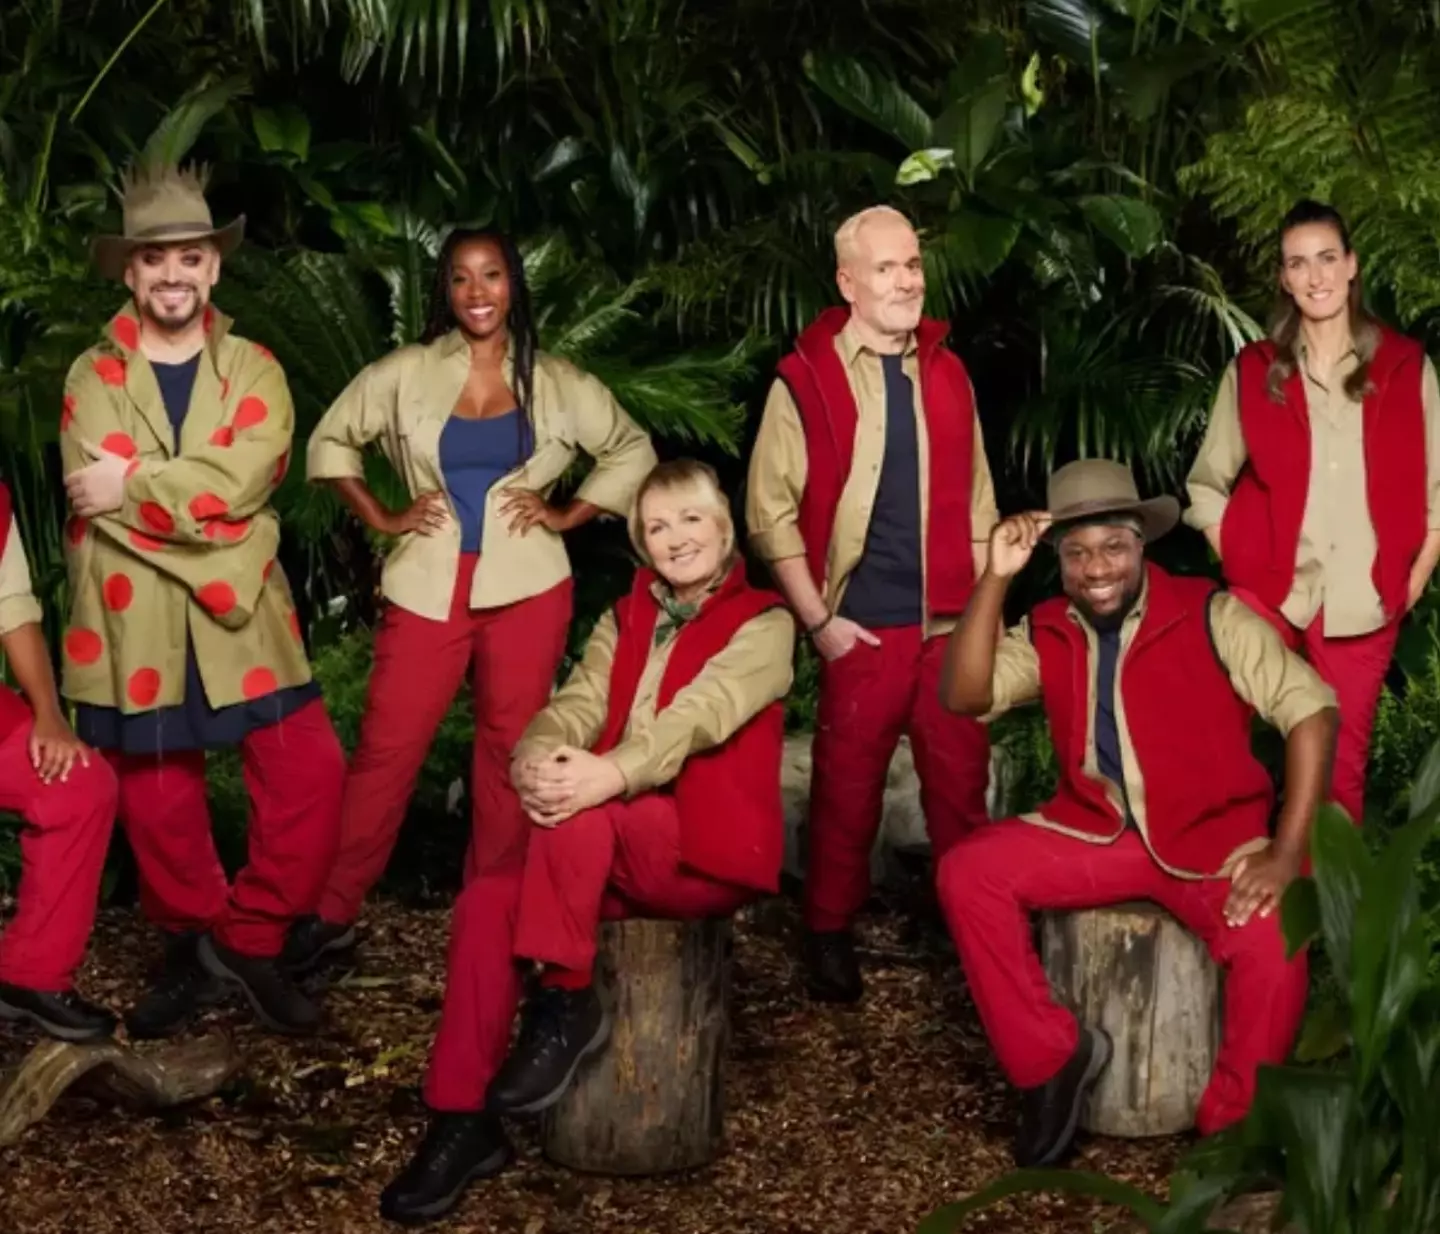 This year's celebs are set to land in the jungle this week.